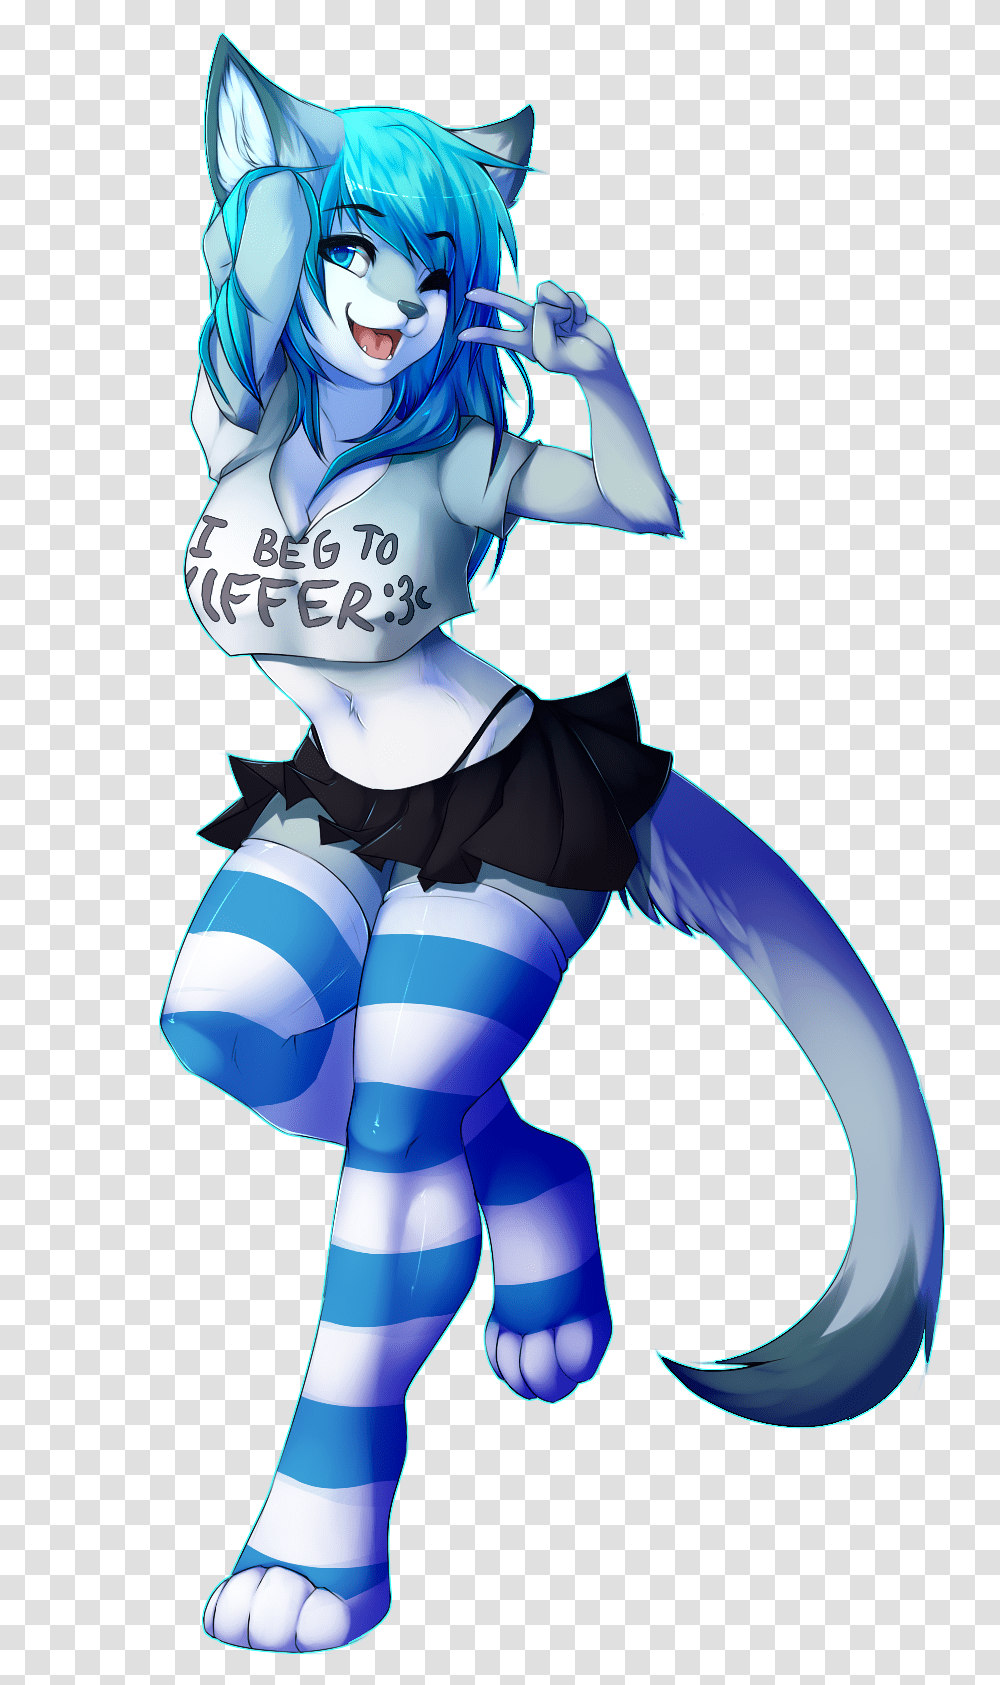 Image 797260 Furries Know Your Meme Anime Furry, Costume, Clothing, Graphics, Art Transparent Png